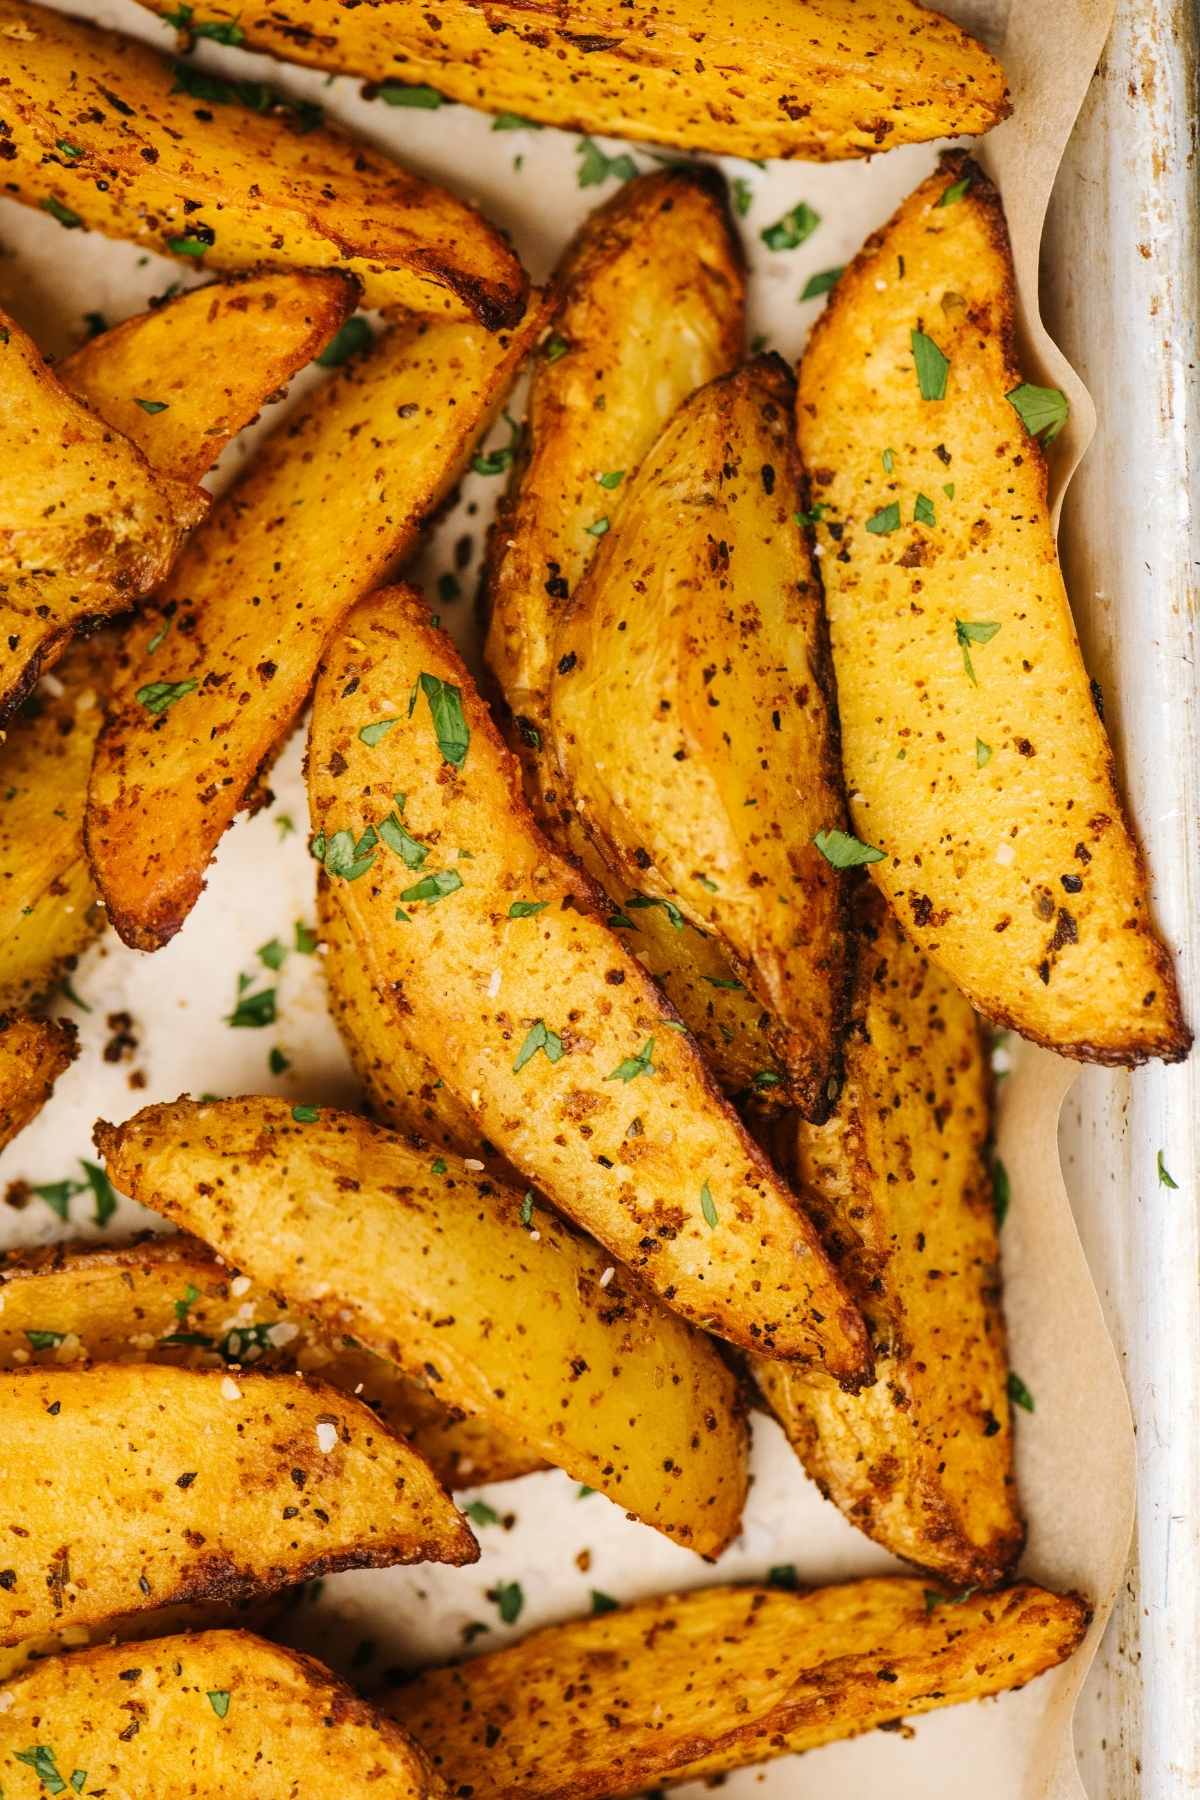 The perfect potato wedges are soft and tender on the inside and crisped to perfection on the outside. Throw in some crunchy garlic and fresh Parmesan and you’ve got the tastiest potato wedges of all time. This recipe is easy to make and results in perfect potato wedges, without parboiling first.